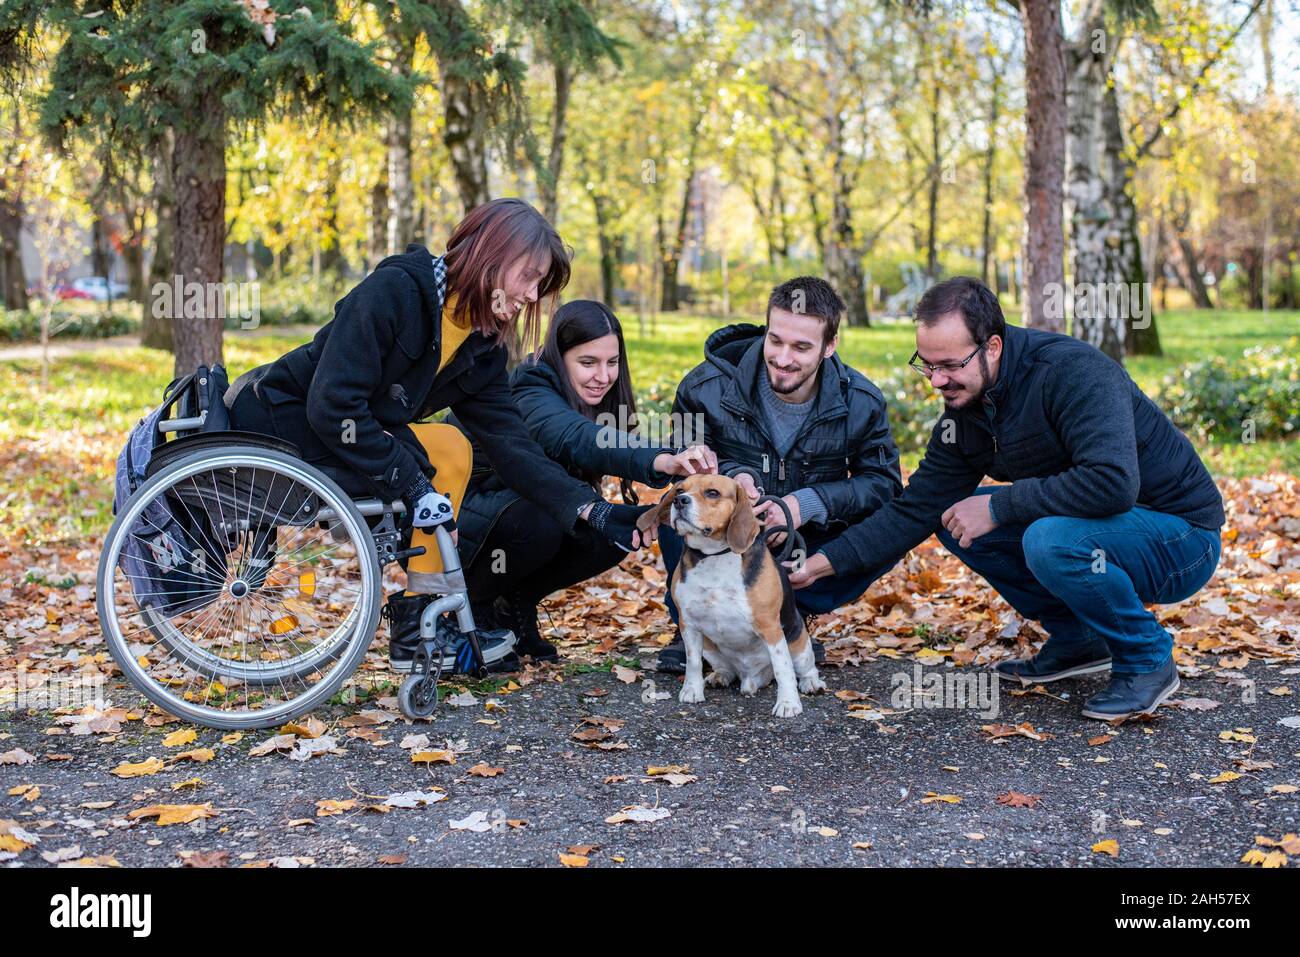 Young disabled woman in a wheelchair playing with dog and friends in nature Stock Photo